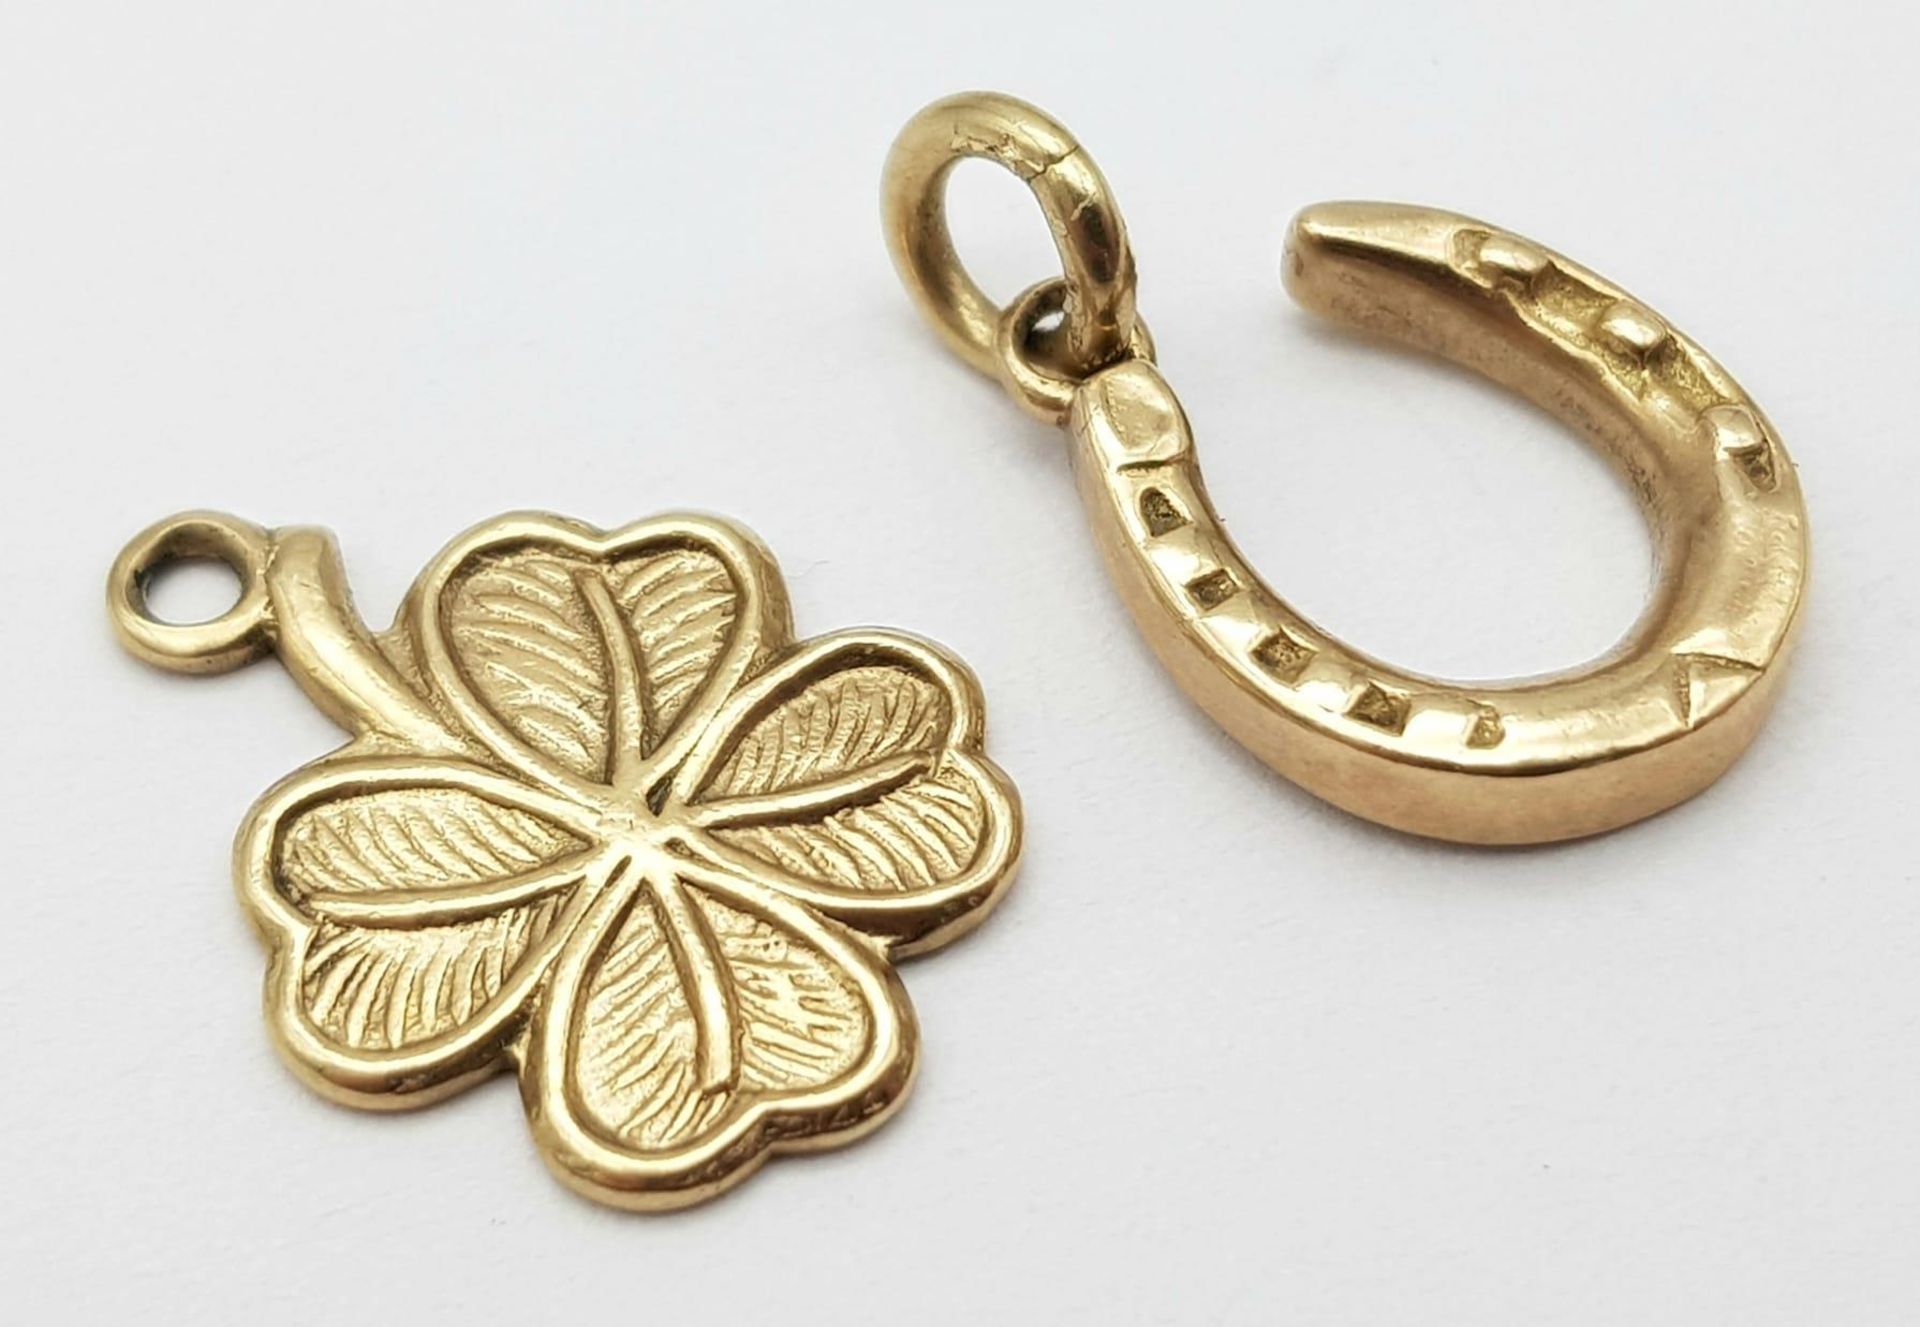 Two 9K Yellow Gold Lucky Pendants/Charms - Horseshoe and clover. 2.32g total weight.